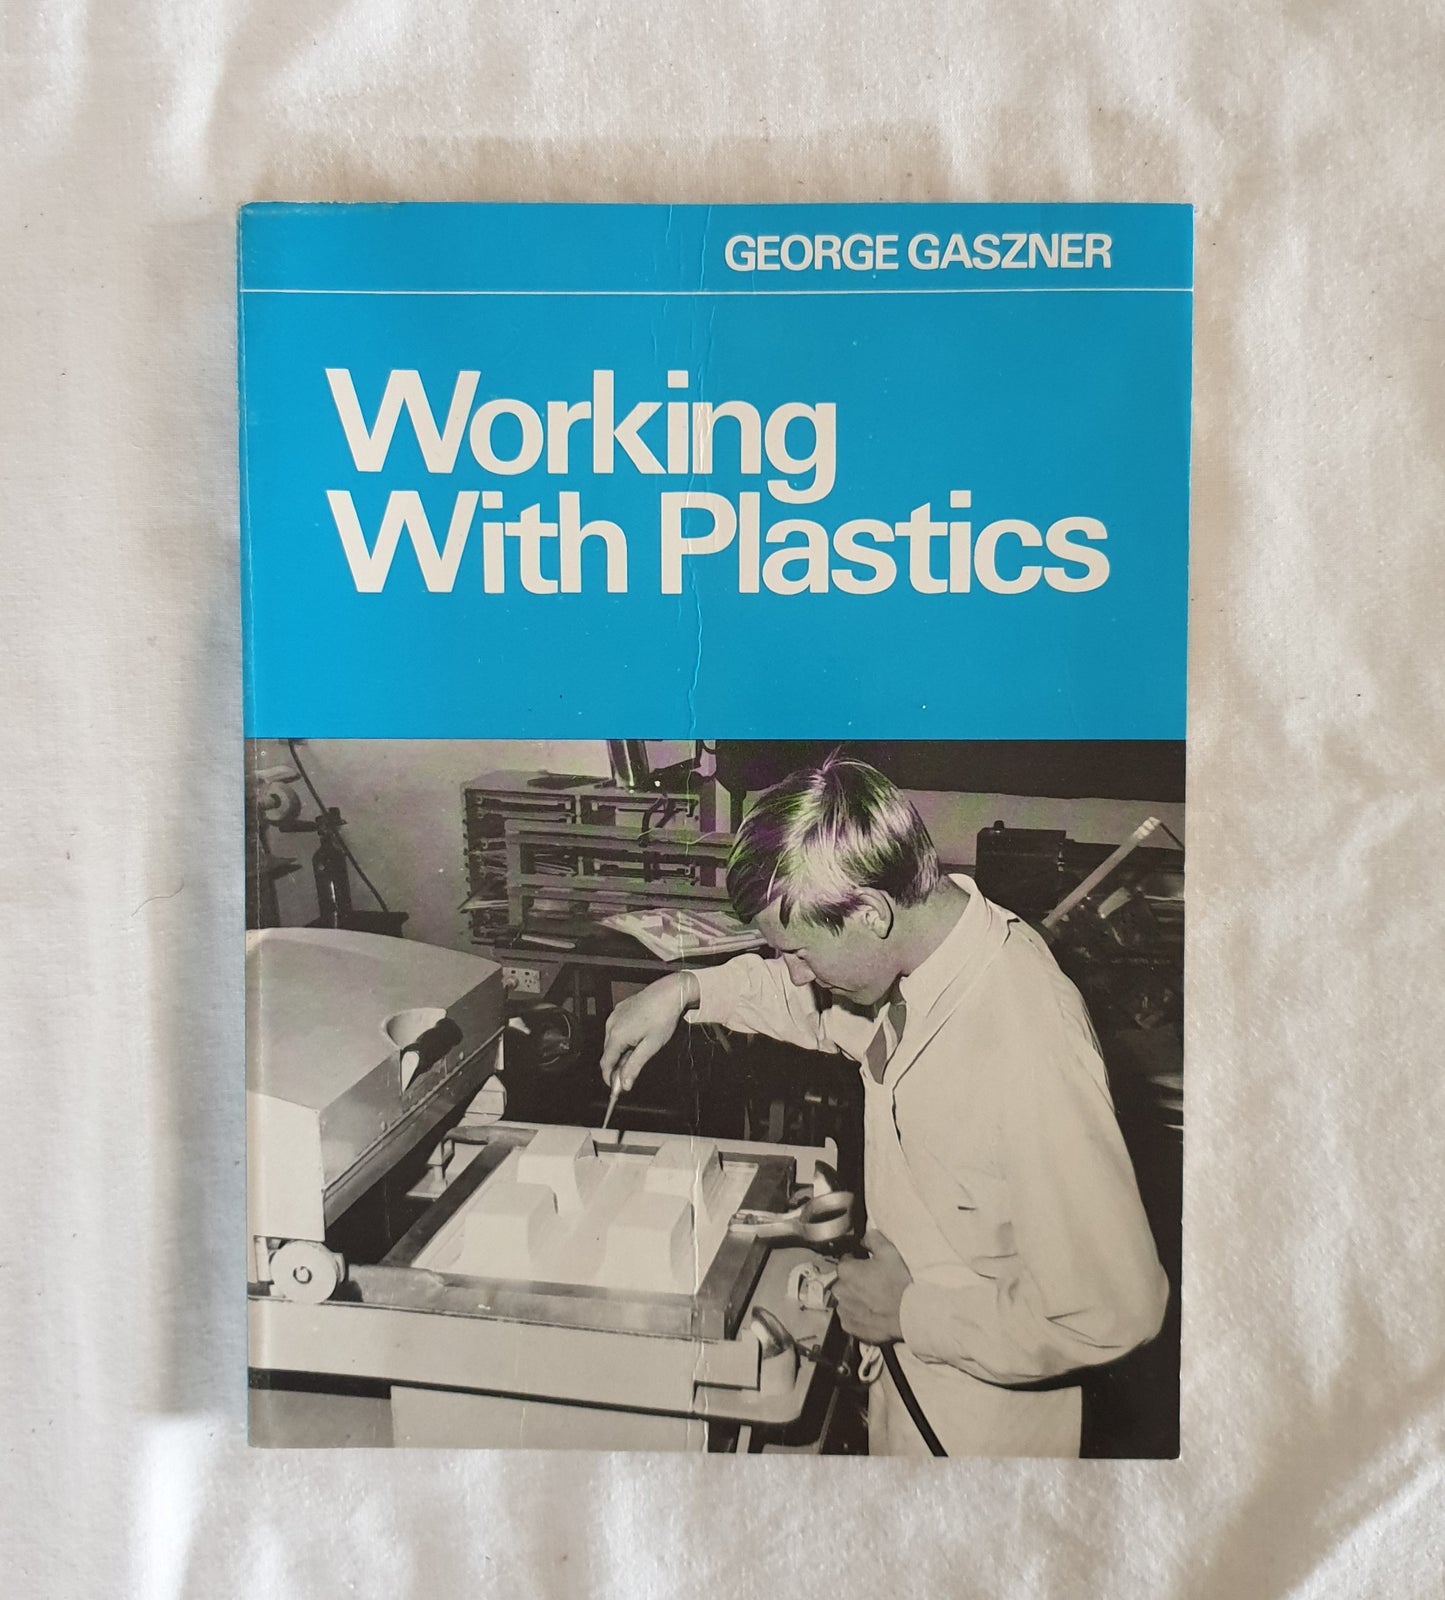 Working With Plastics  by George Gaszner